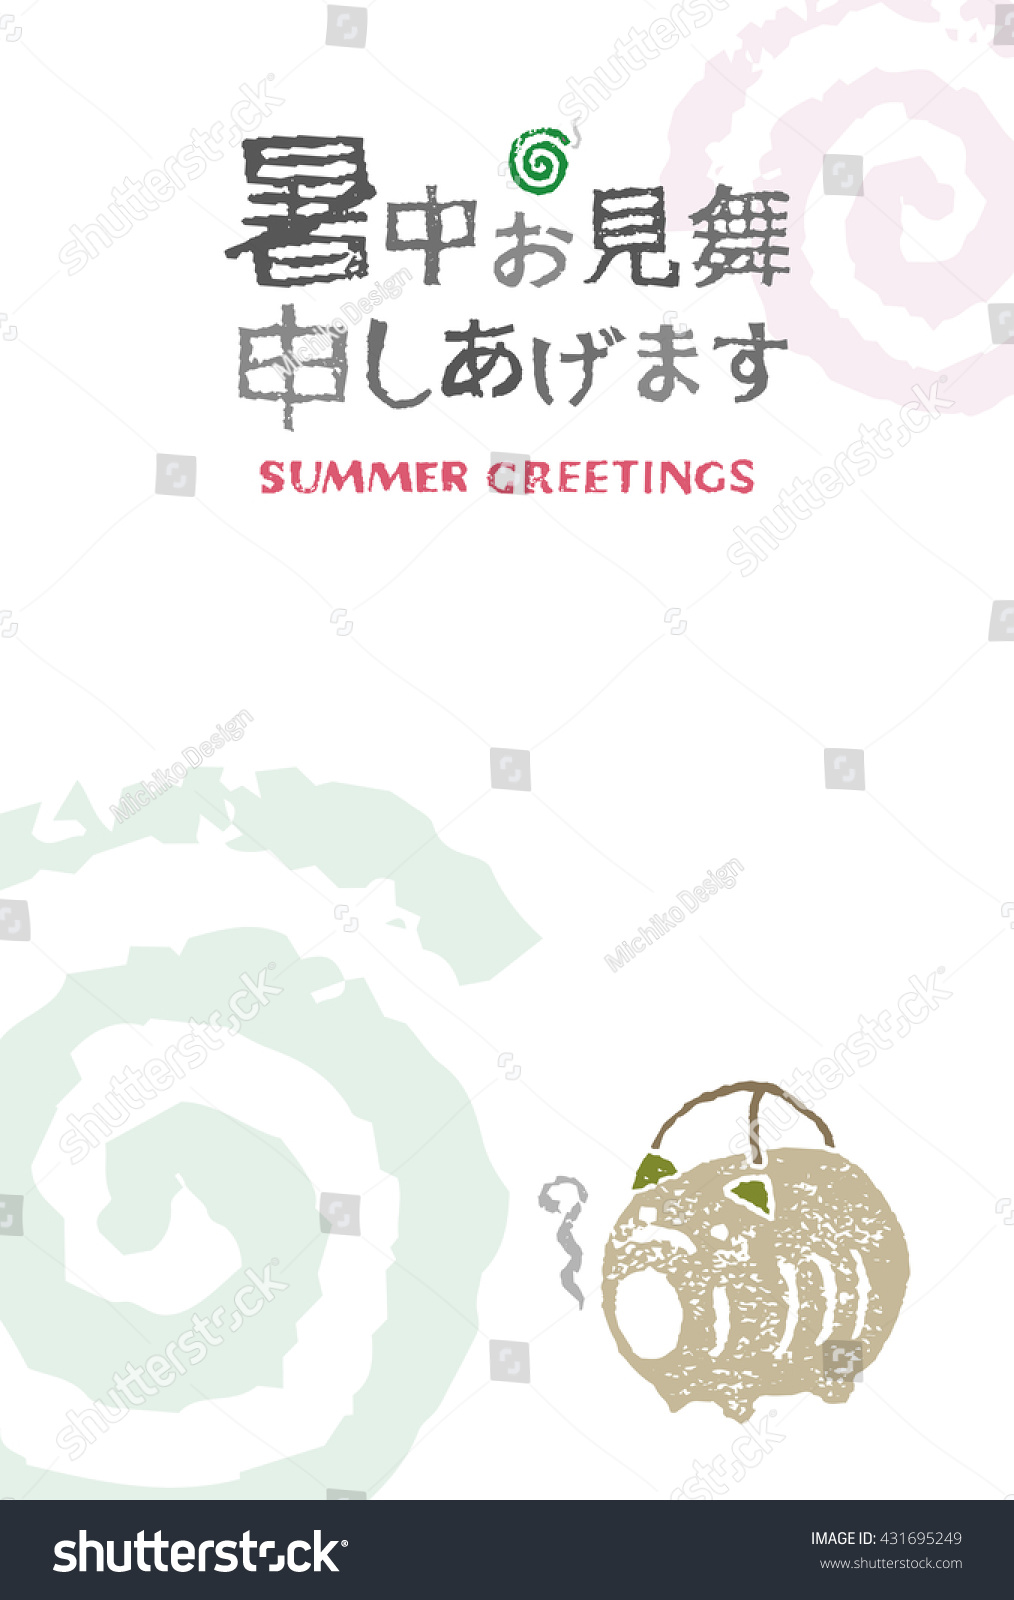 SVG of Mosquito coils and a pig coil holder, summer greeting card / translation of Japanese 